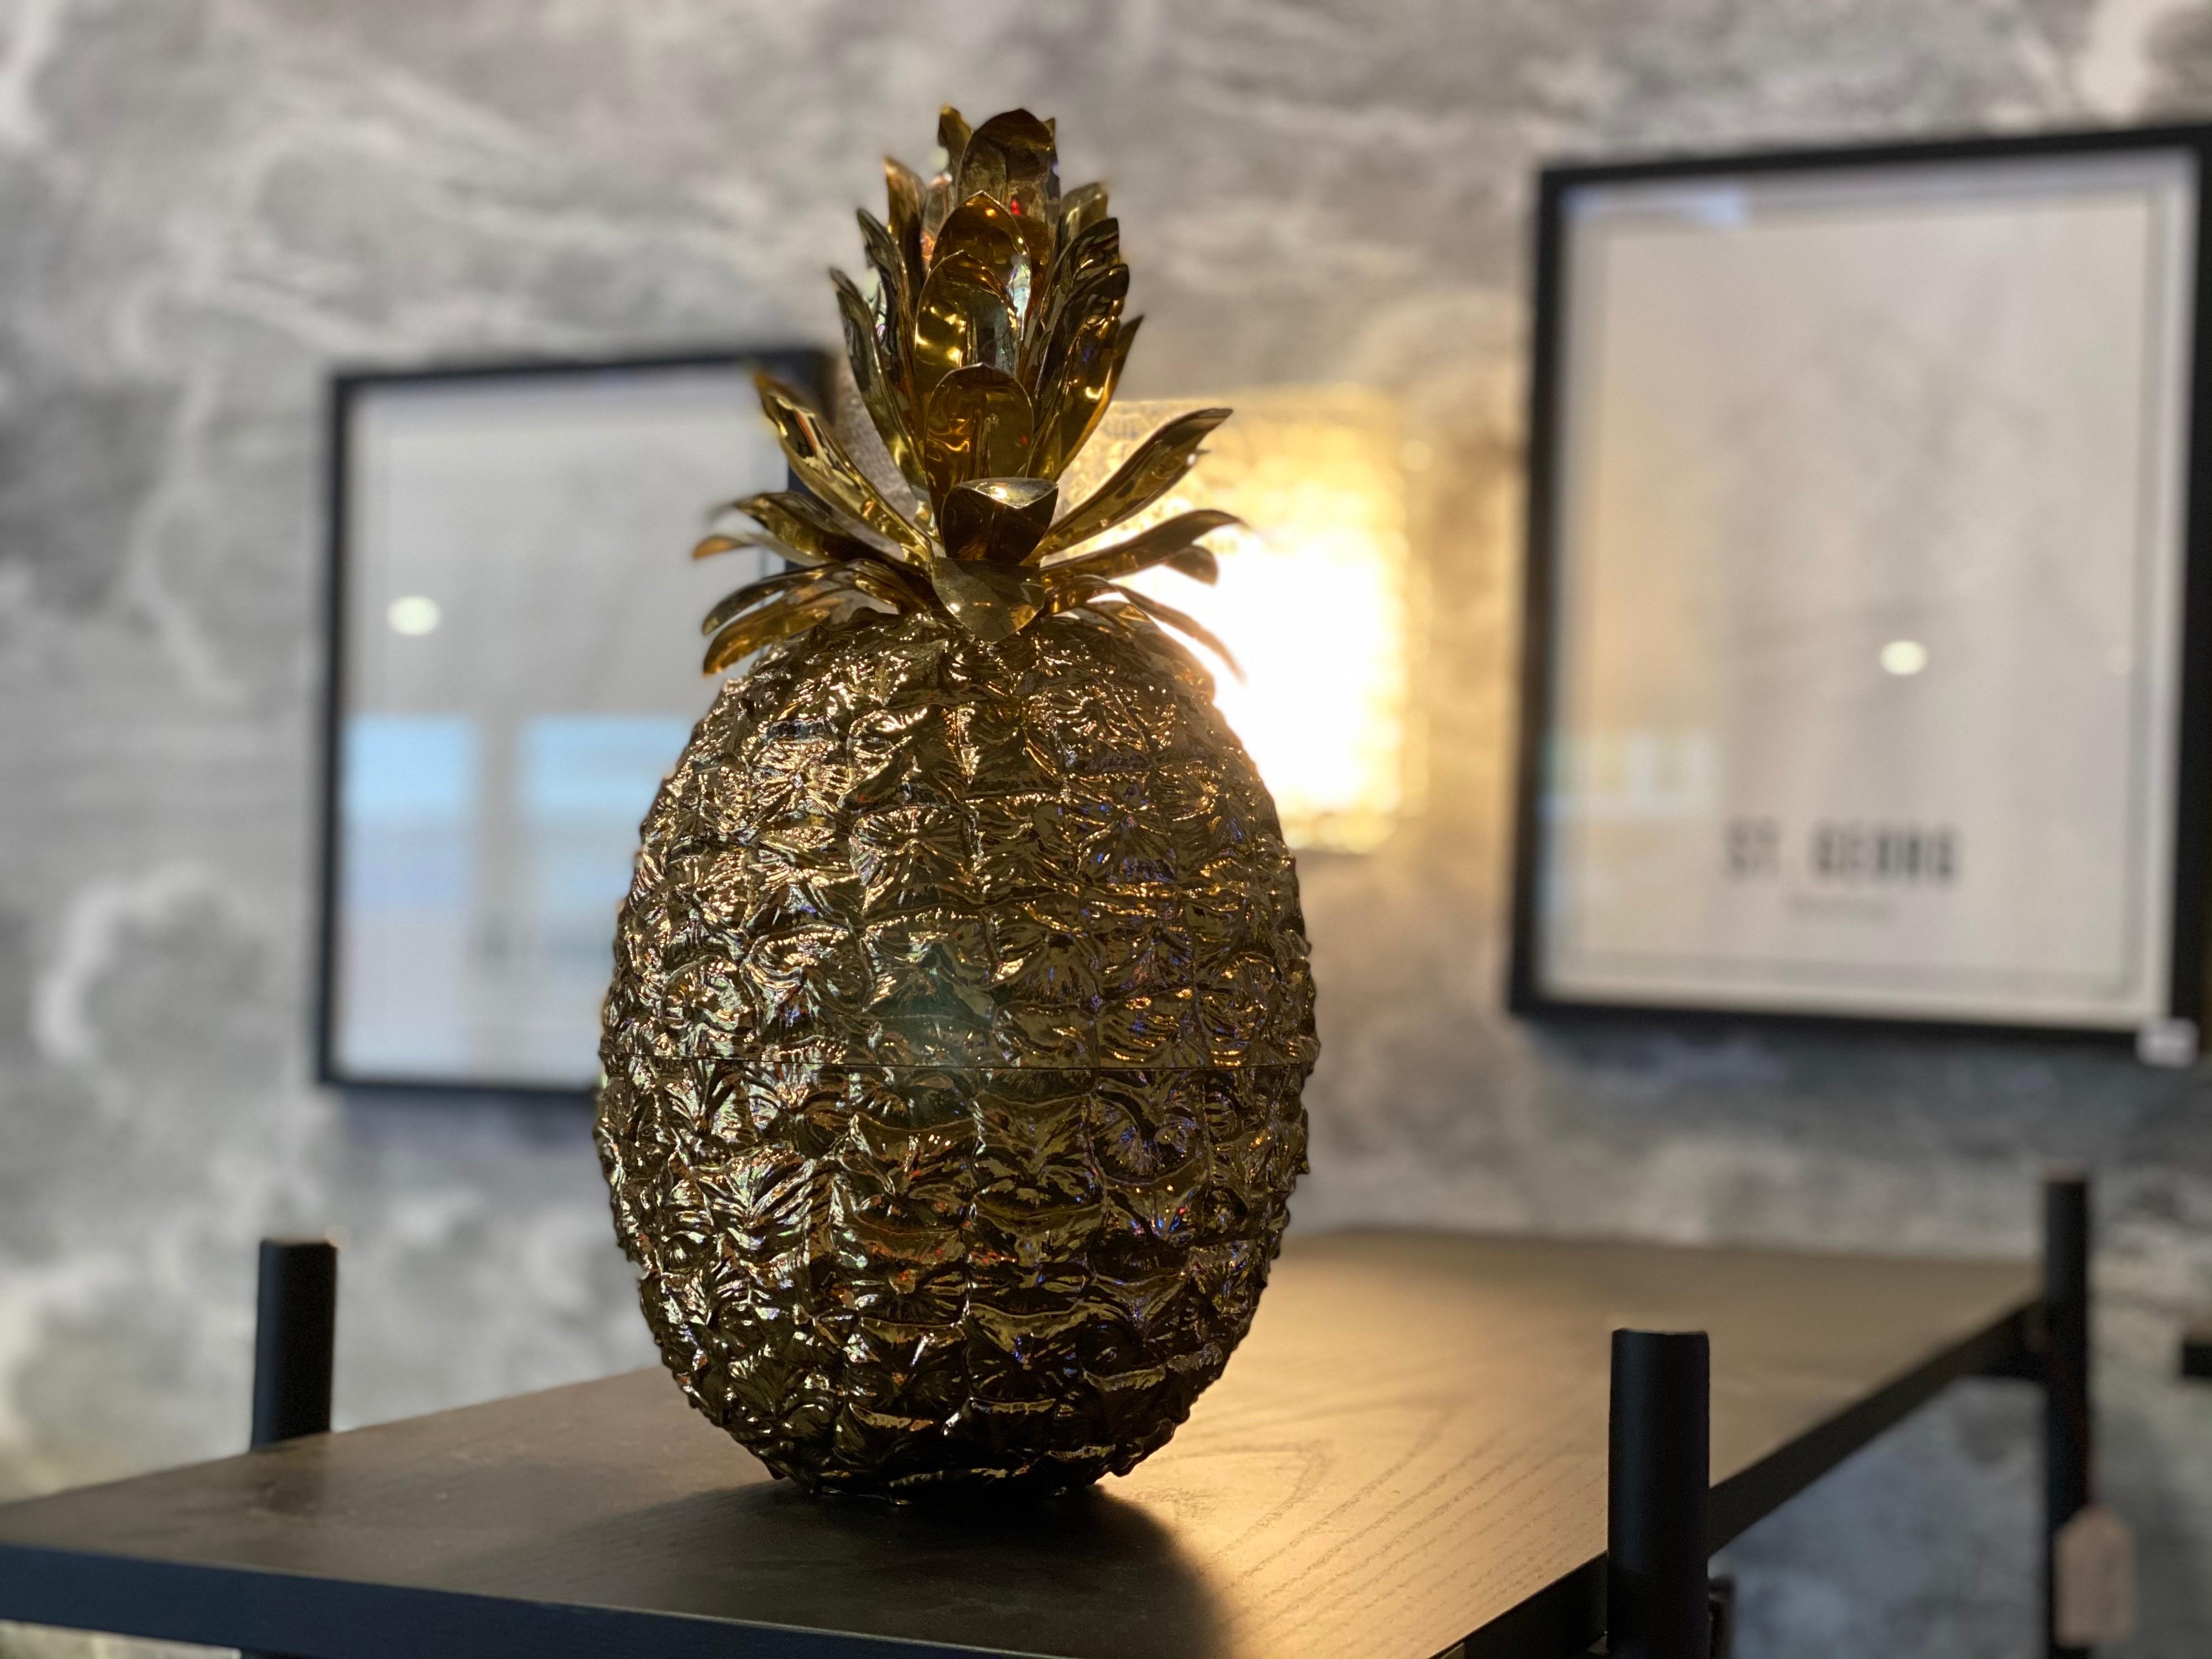 Beautiful golden pineapple ice bucket, designed by Hans Turnwald for the Swiss company Freddo Therm. This detailed ice bucket in the shape of a pineapple is a beautiful, luxurious addition to your home bar or simply as a special decoration for that